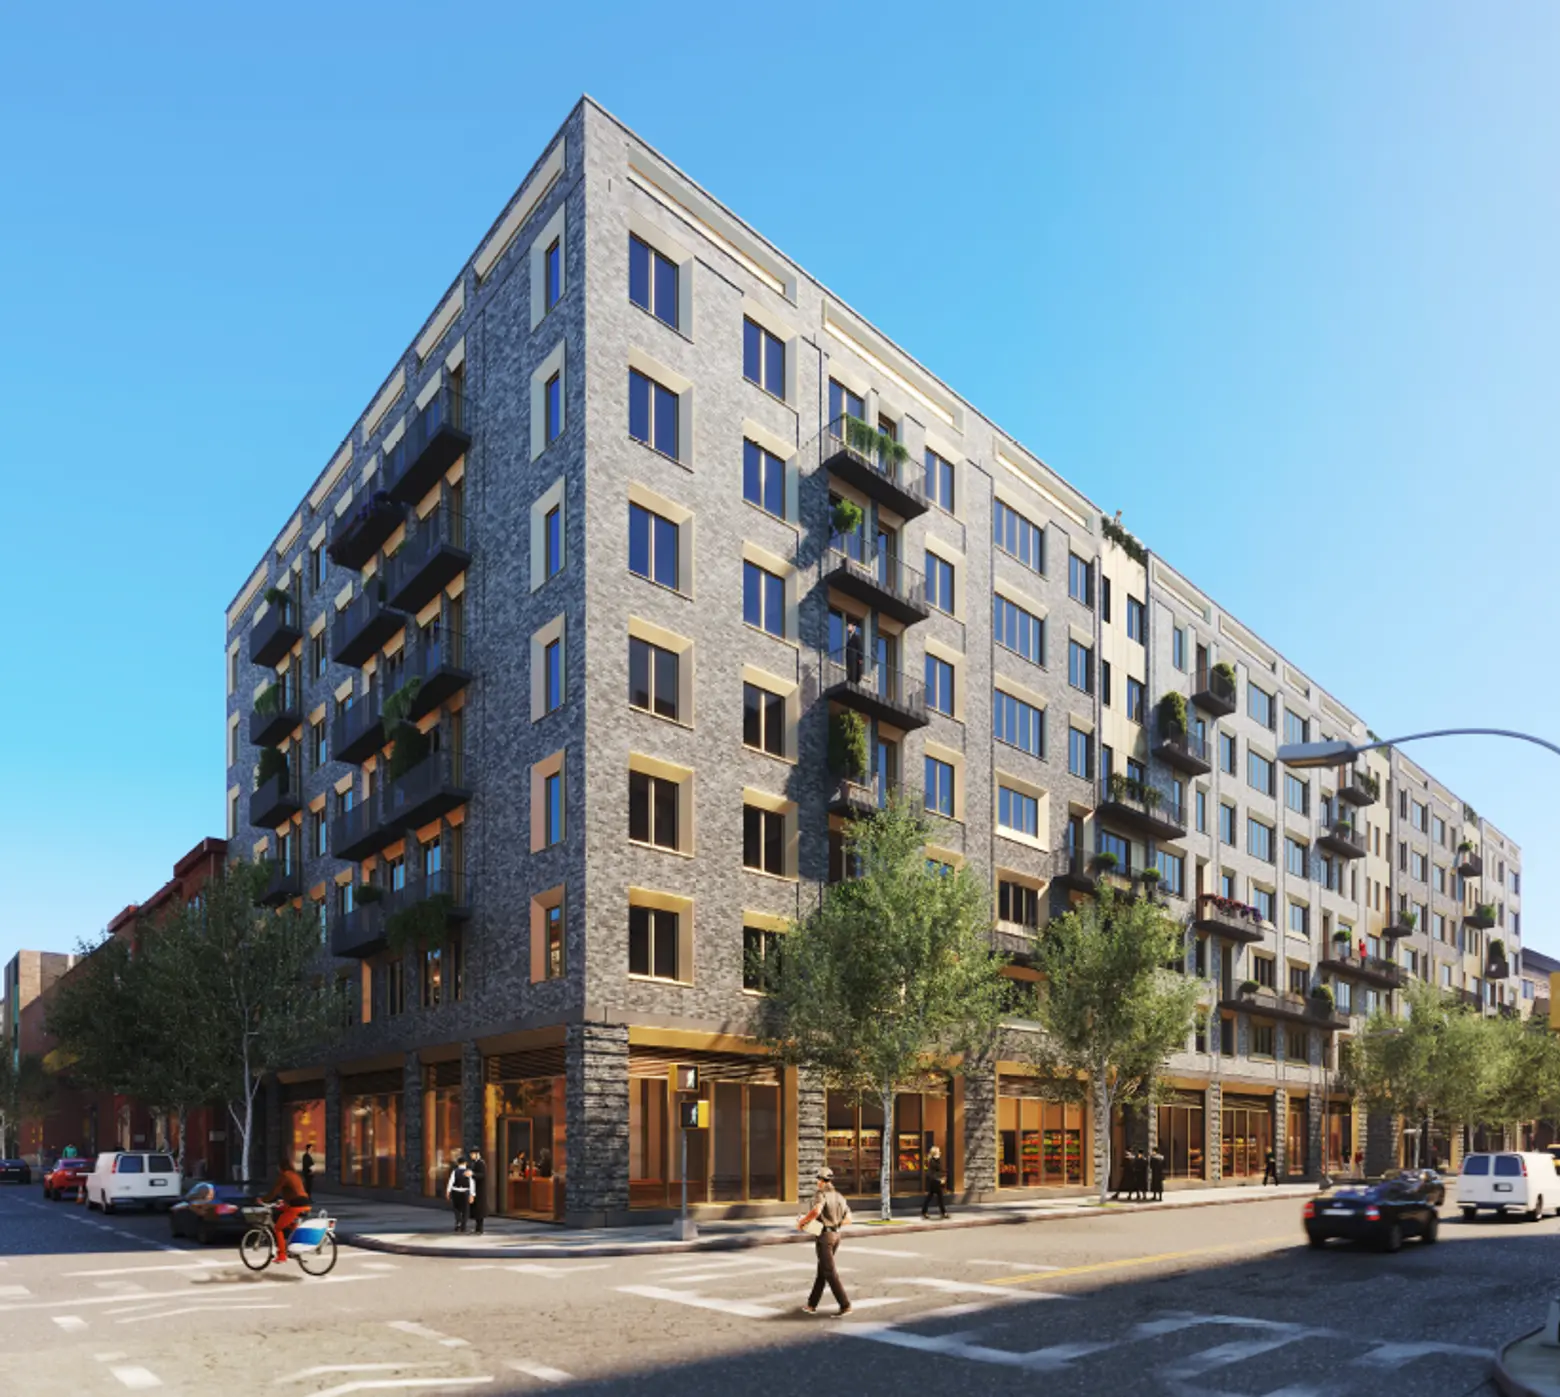 Apply for 59 middle-income apartments in South Williamsburg, from $1,382/month